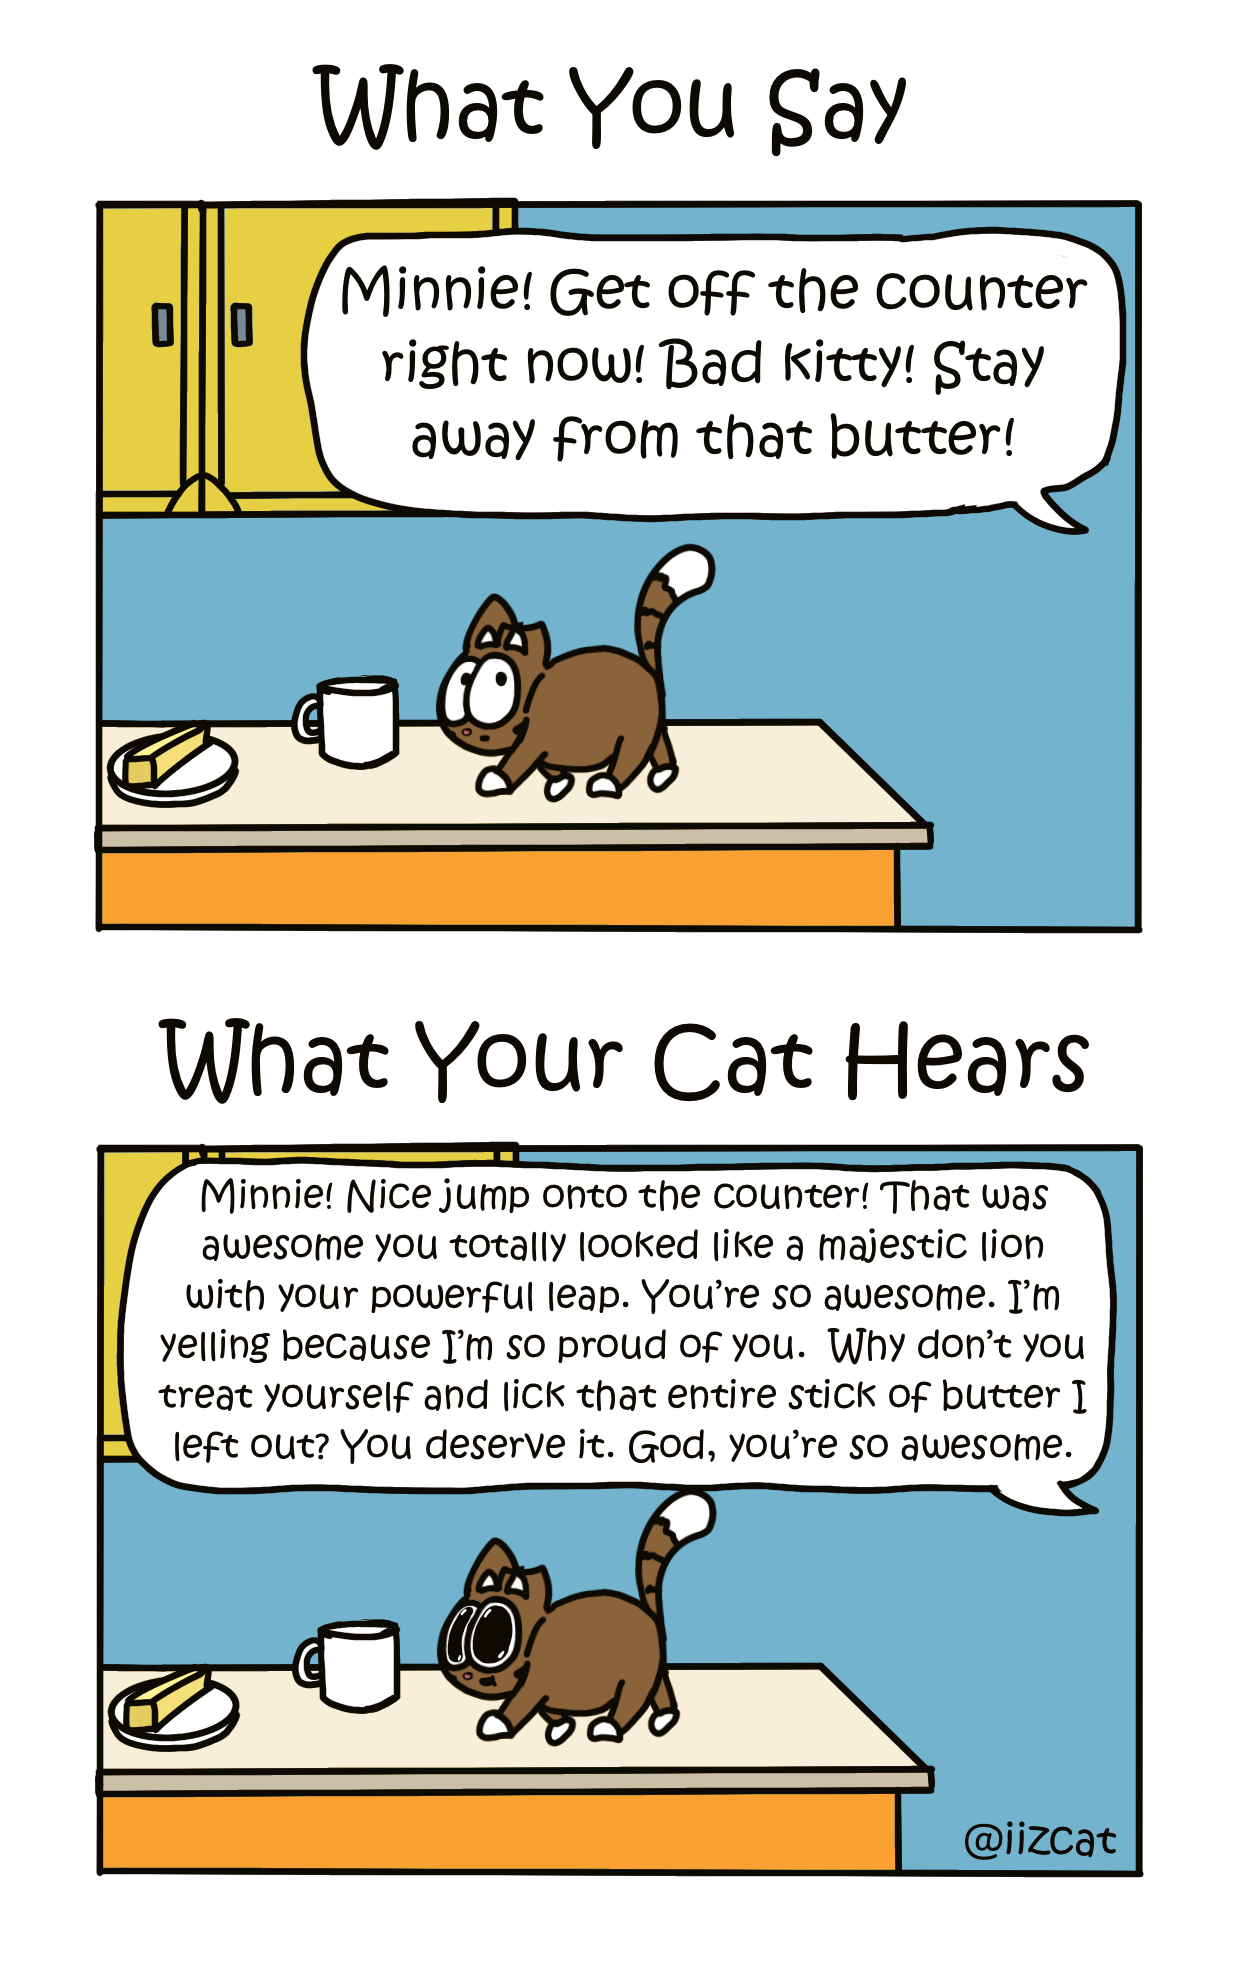 comic illustrating what you say versus what your cat hears